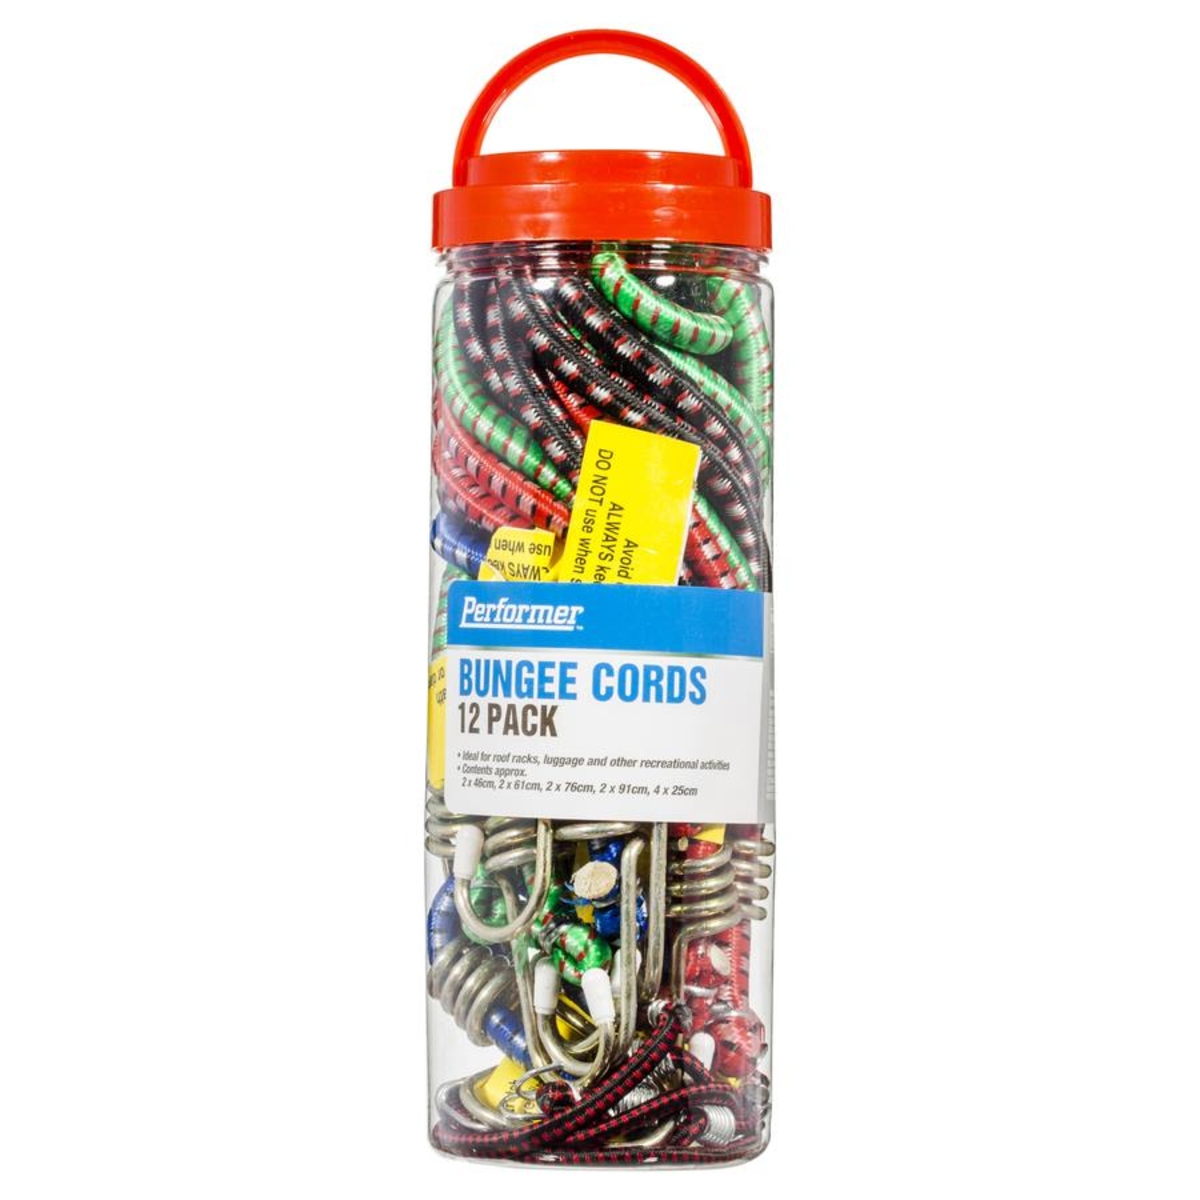 Bungee Cords - Pack of 12